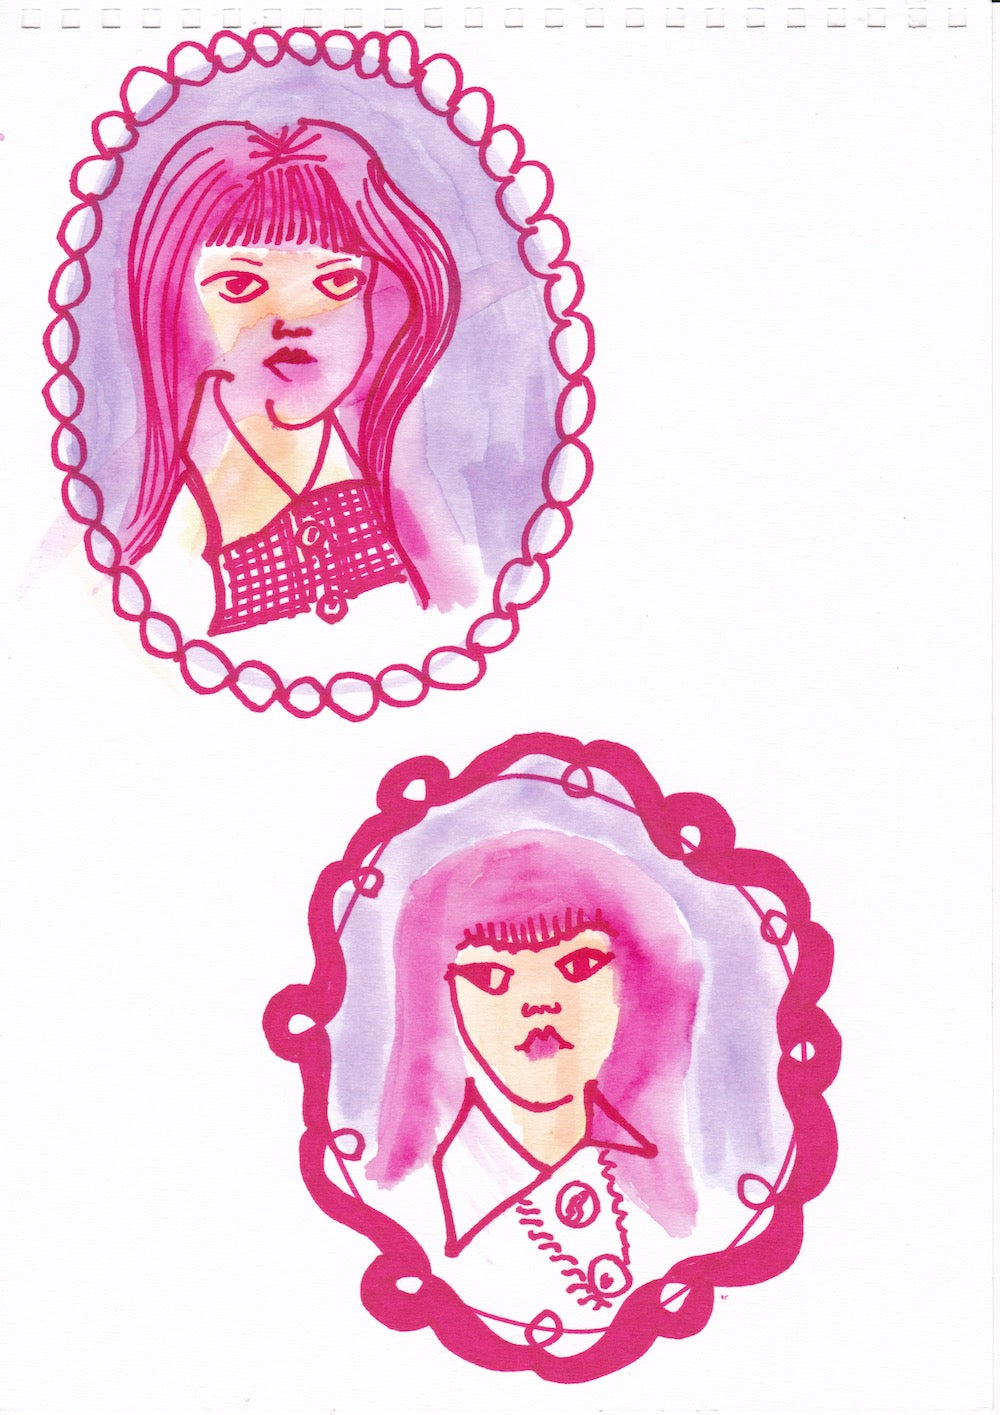 Pair of pink portraits in a cartoon style.